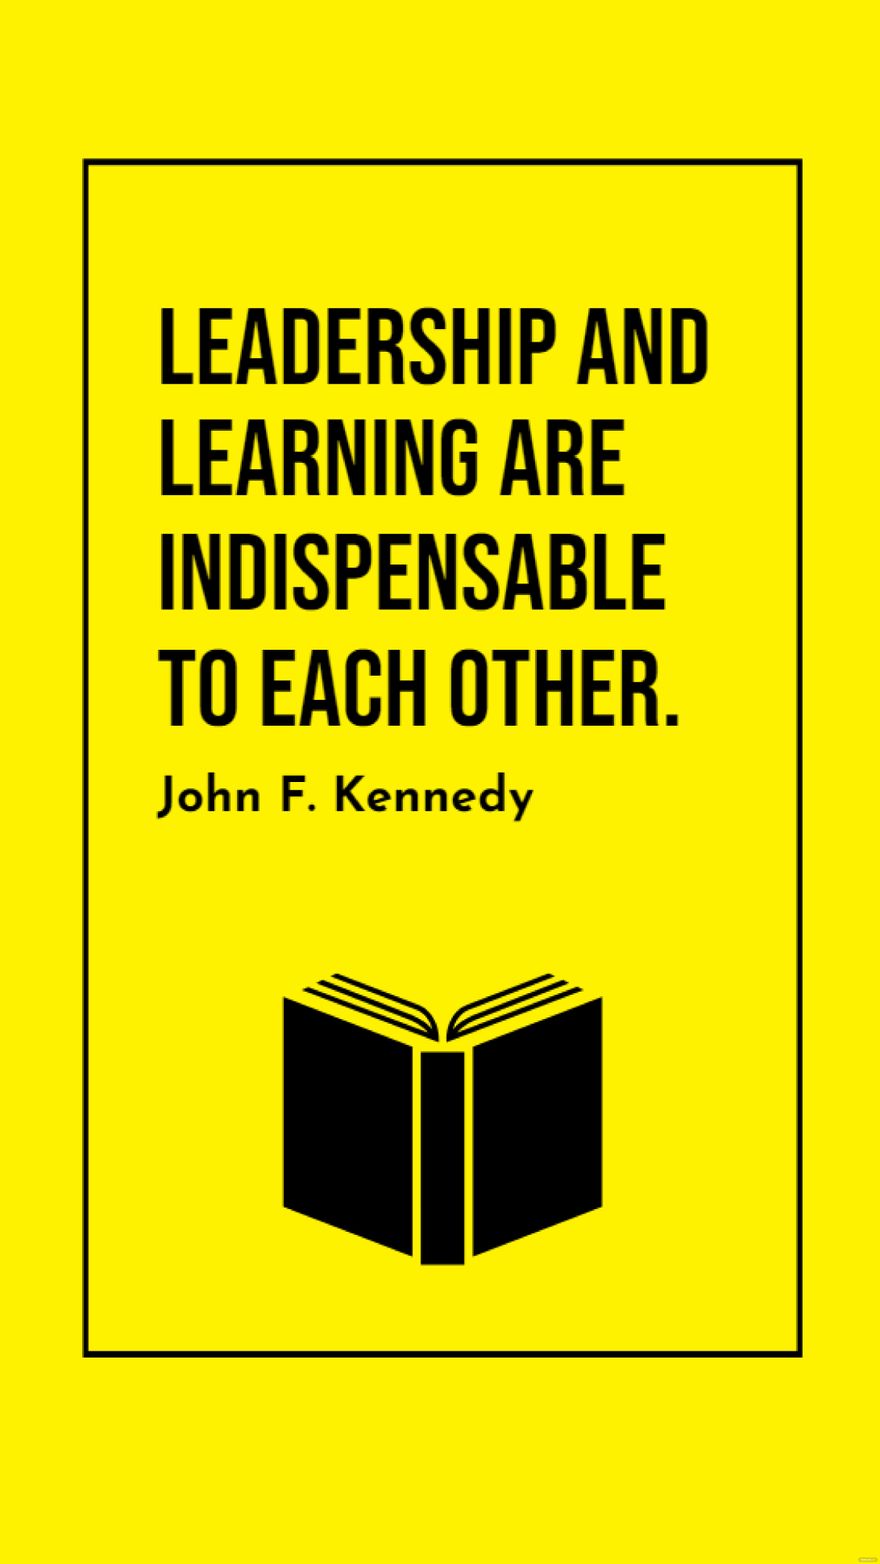 Free John F. Kennedy - Leadership and learning are indispensable to each other. in JPG